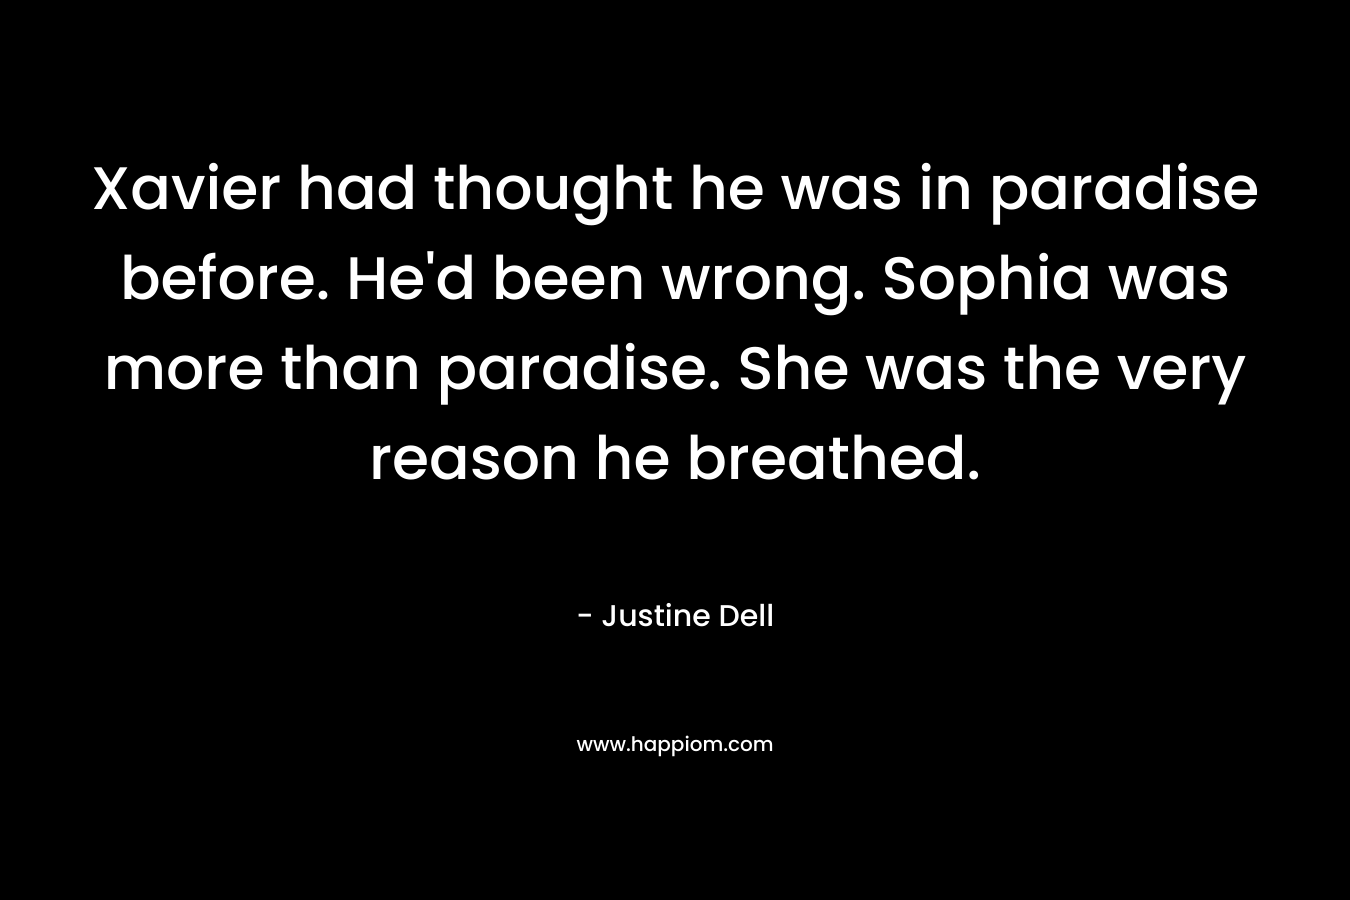 Xavier had thought he was in paradise before. He'd been wrong. Sophia was more than paradise. She was the very reason he breathed.